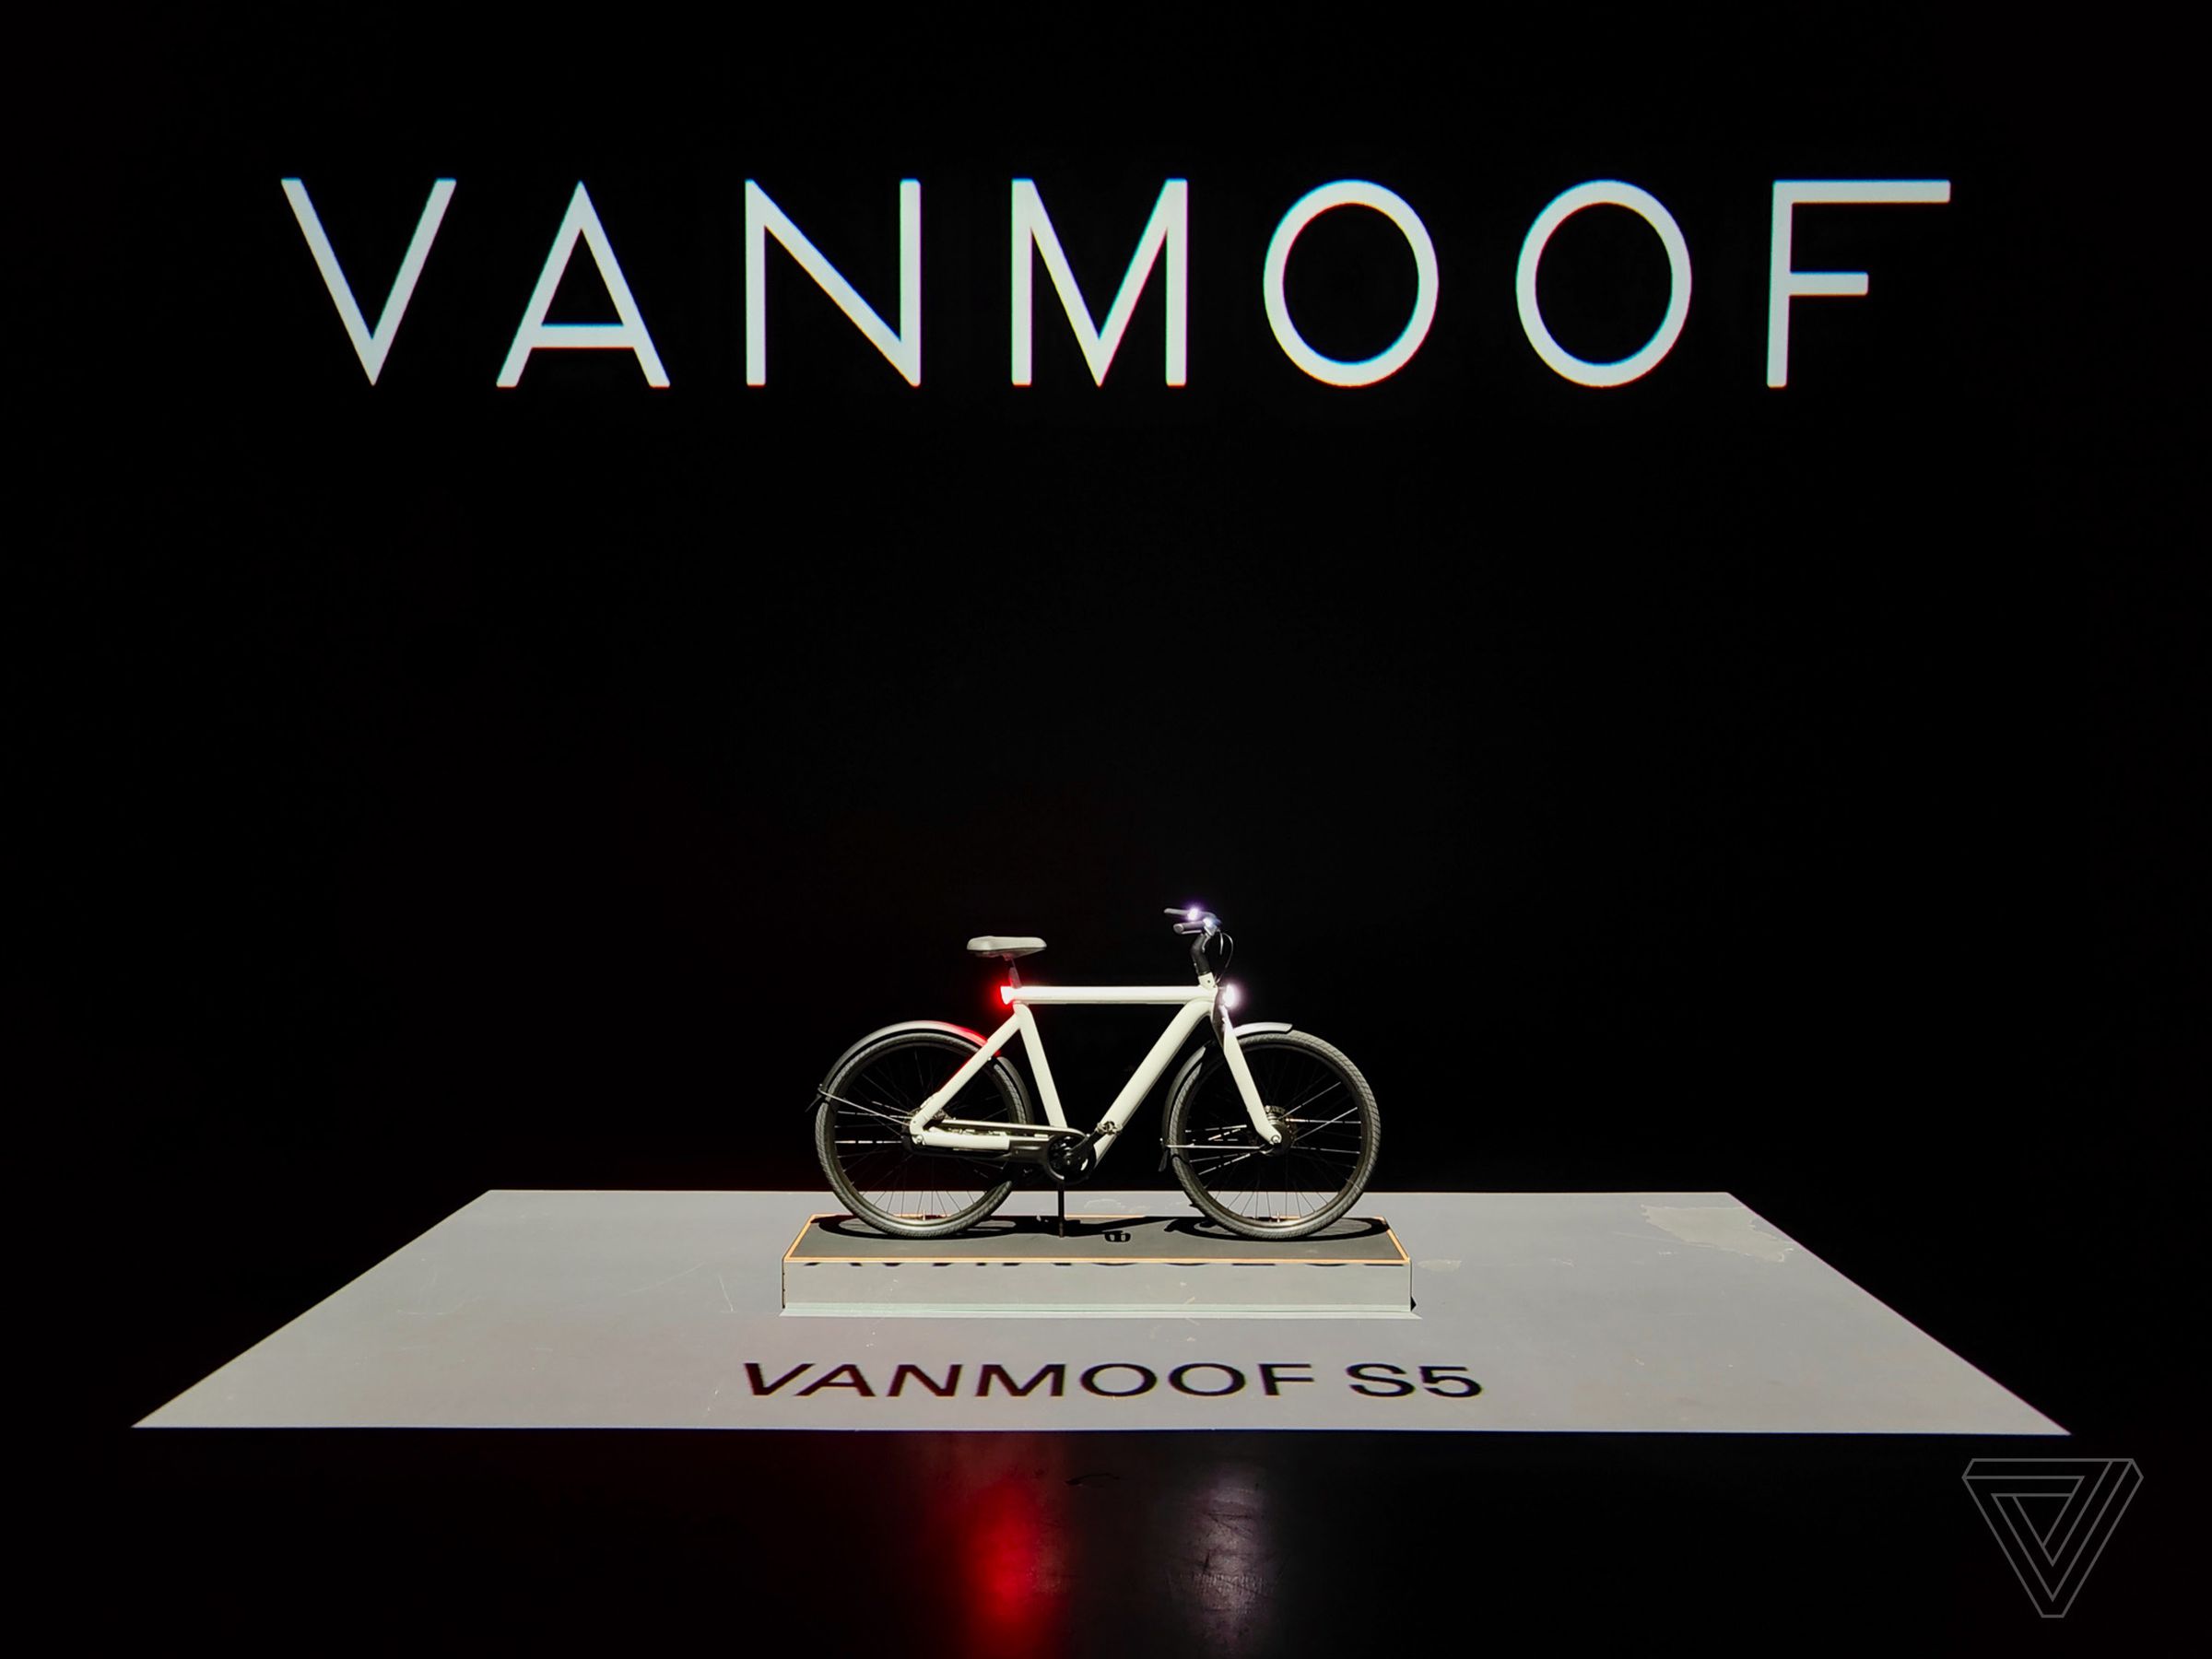 The VanMoof S5 revealed at a press event in Amsterdam last week.